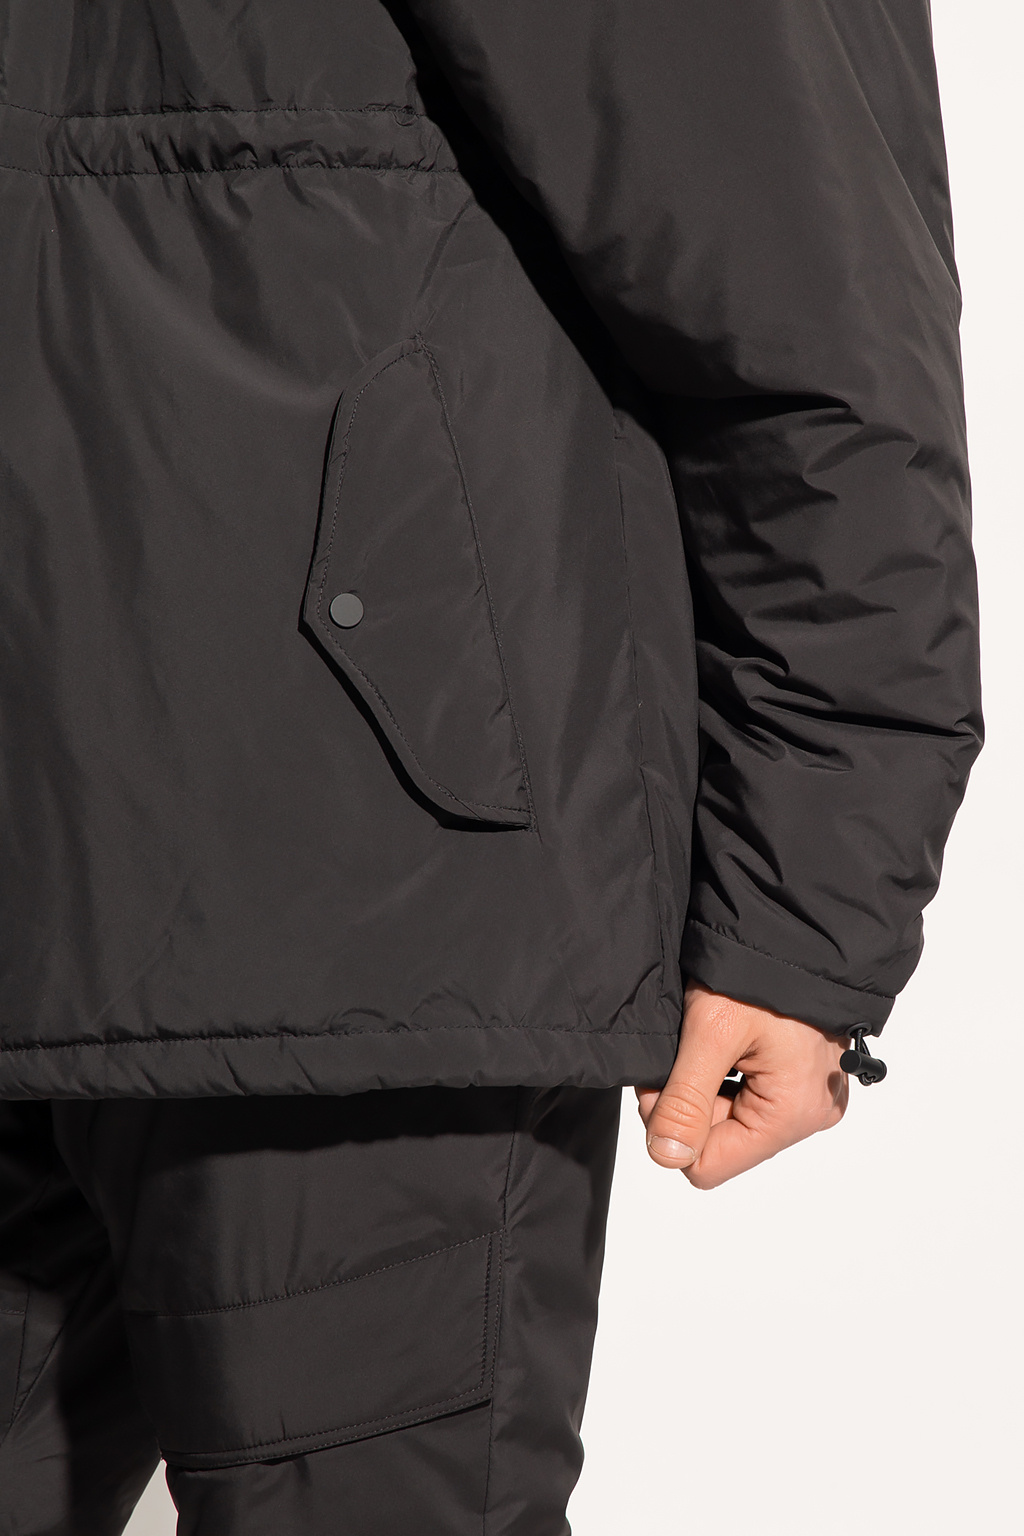 Fear Of God Essentials Parka with collar | Men's Clothing | Vitkac